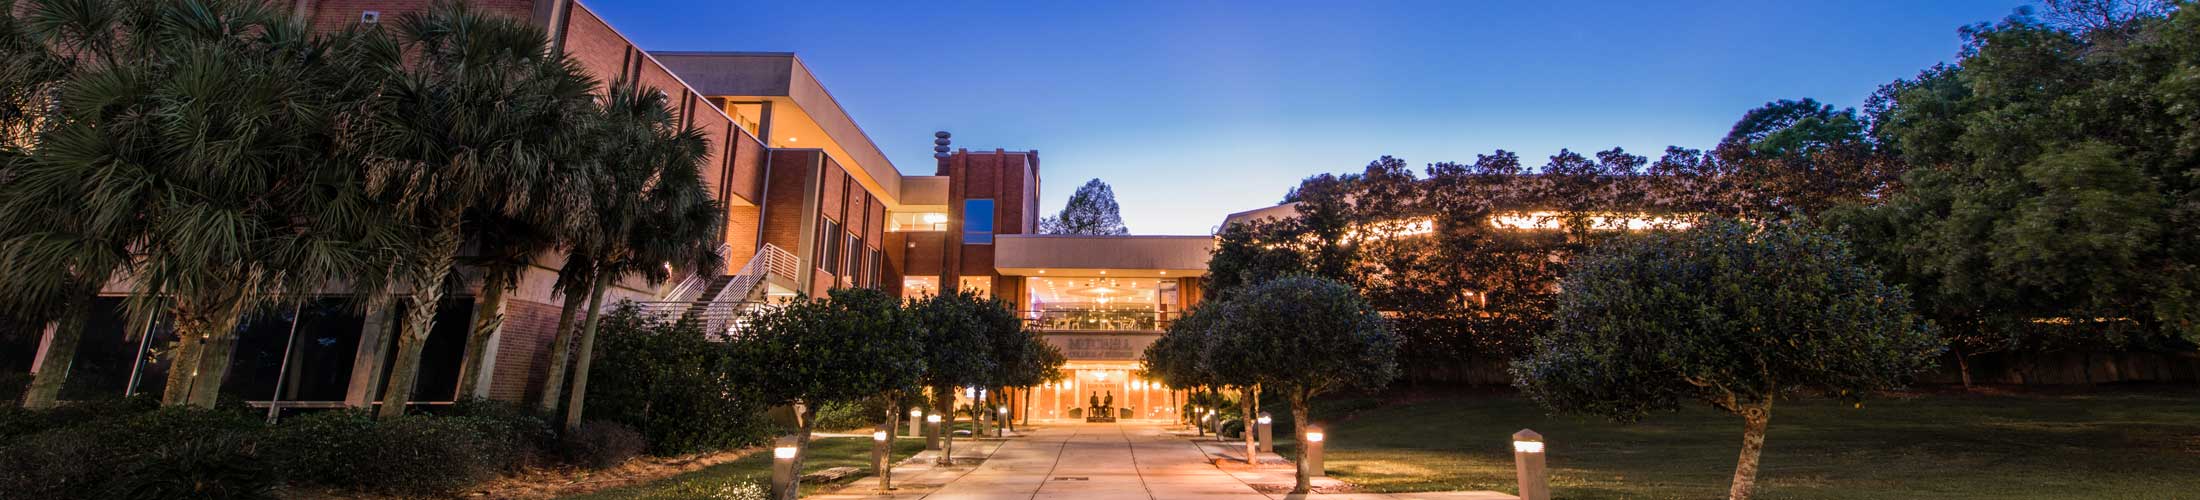 Mitchell College of Business at Night -- Seen as one of the top business schools in Alabama.